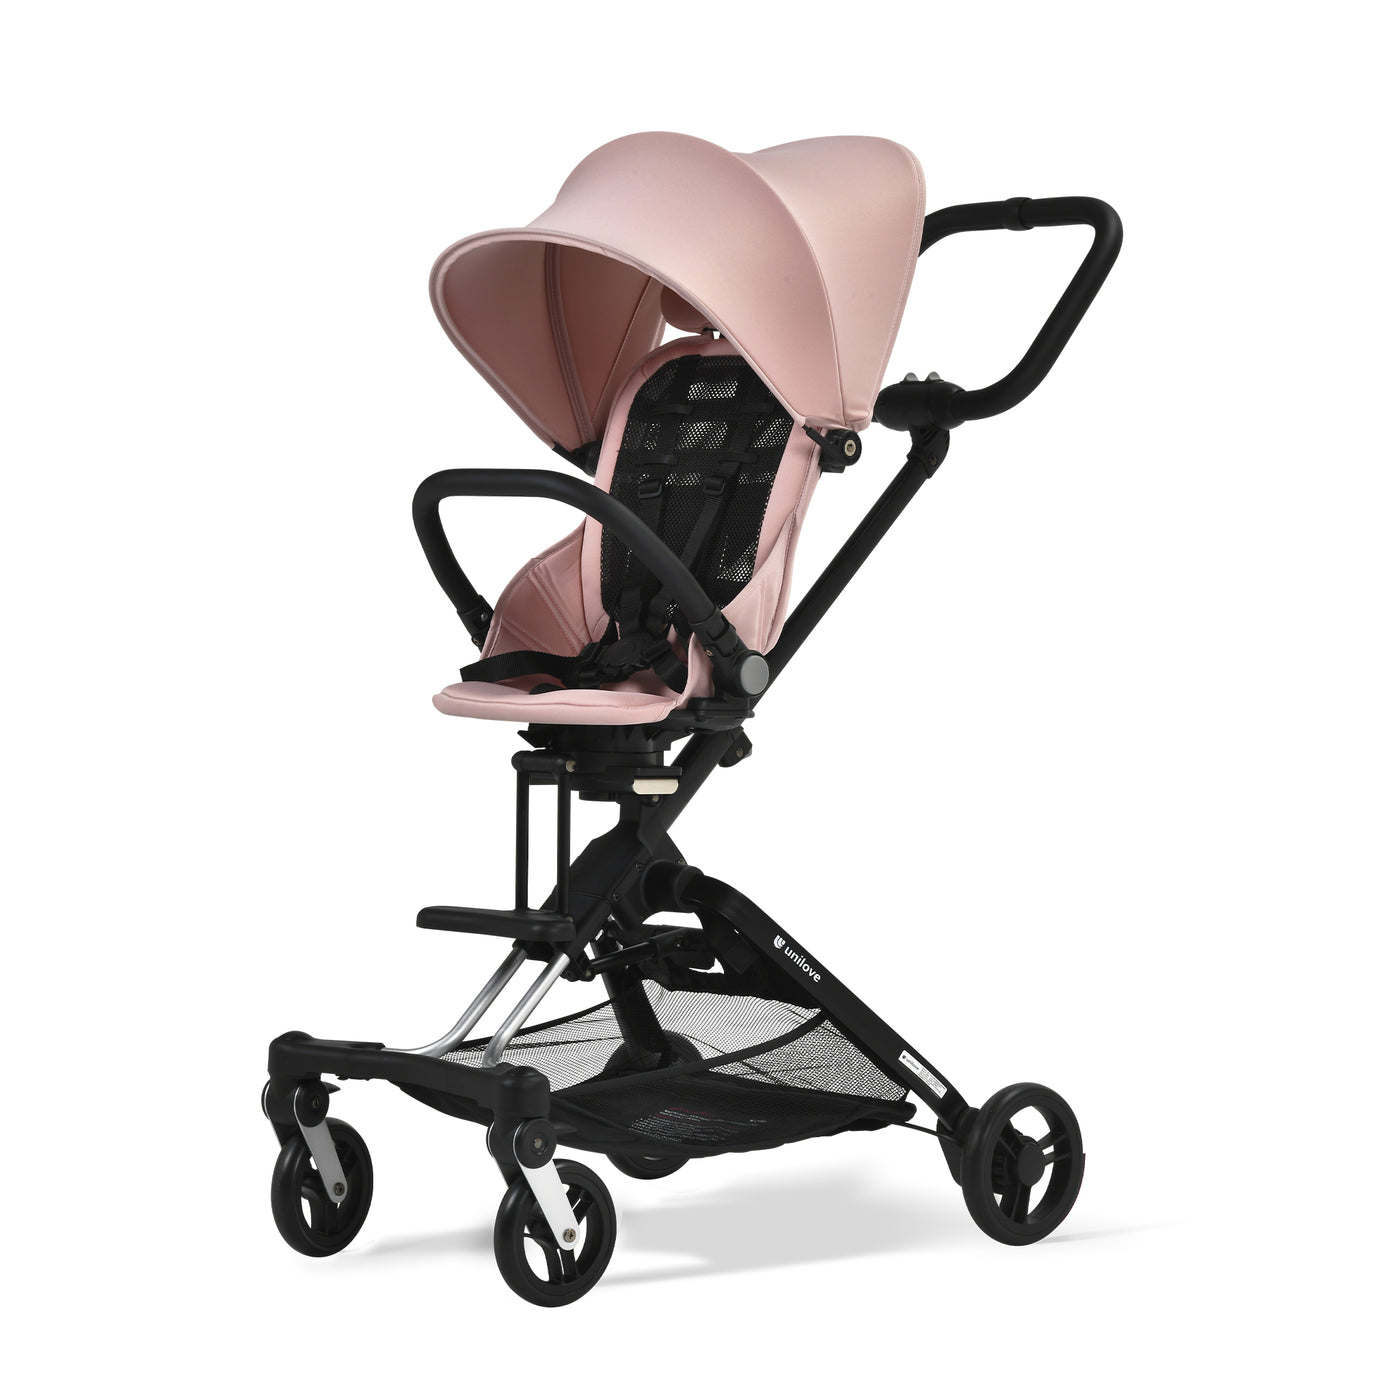 Unilove On The Go 3-In-1 Frame Stroller with Reversible Toddler Seat